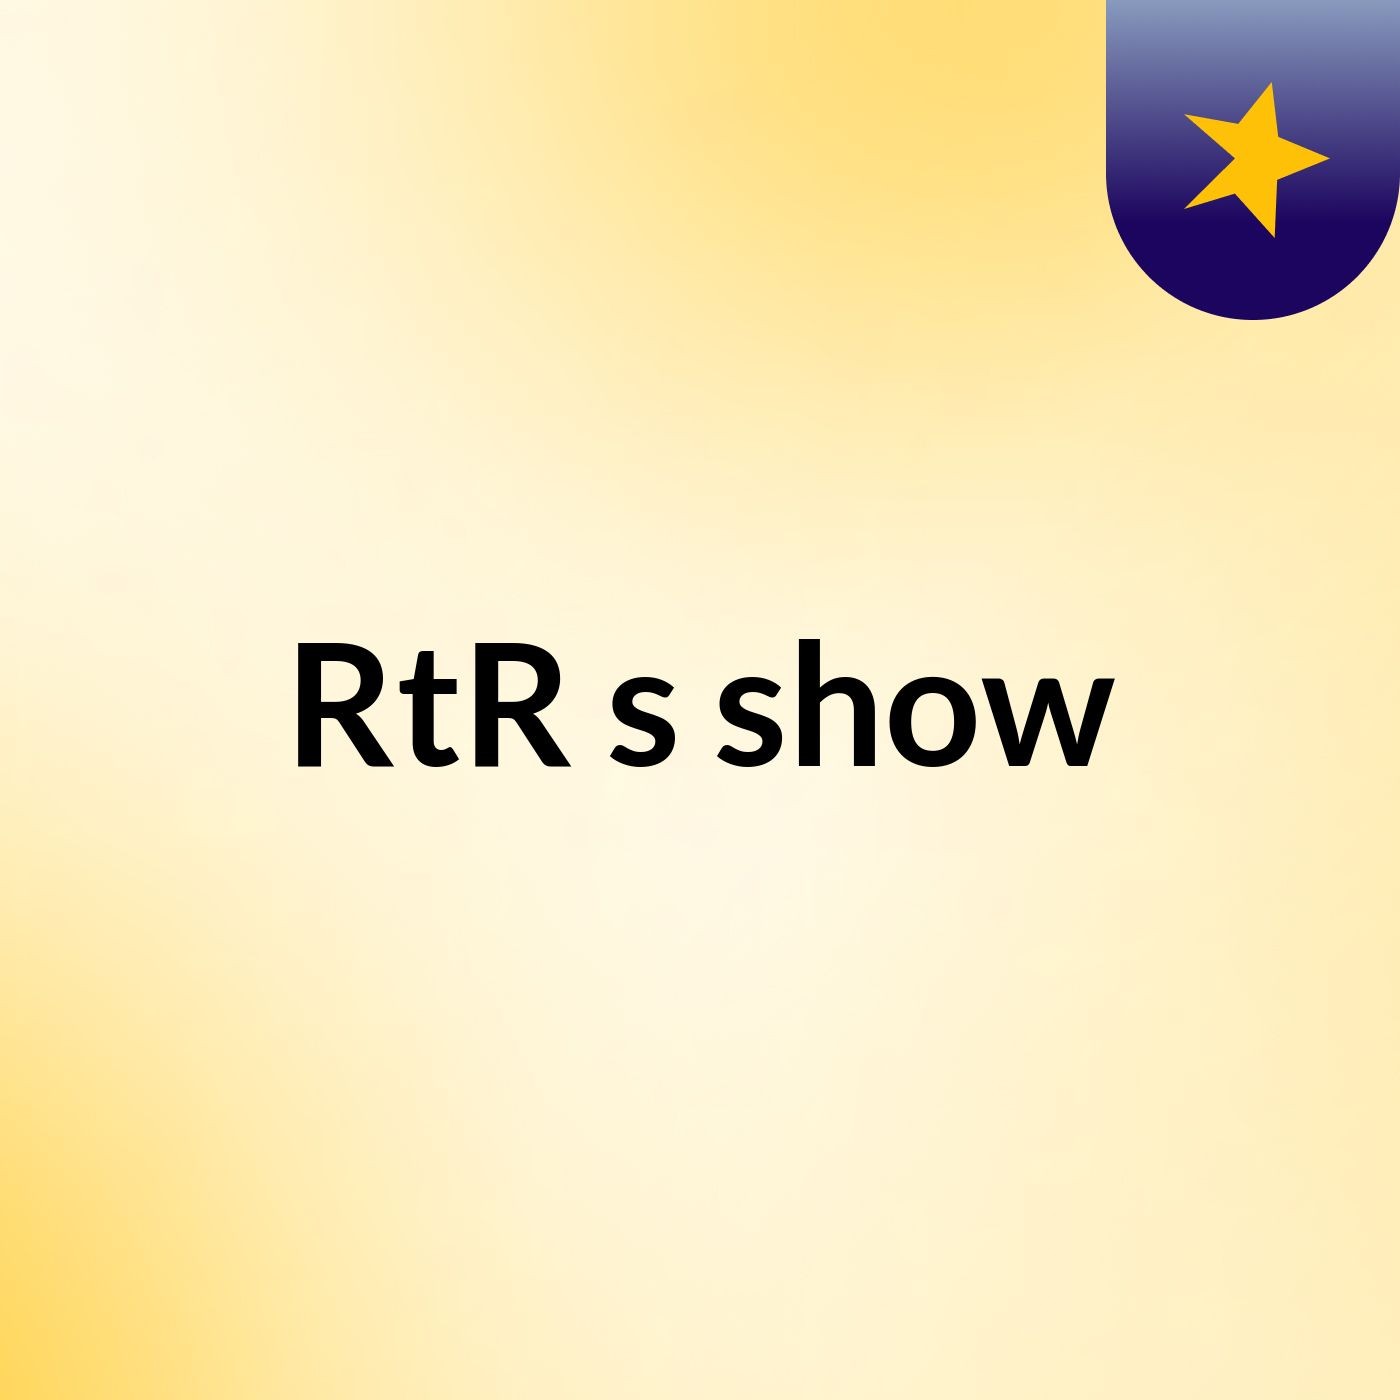 RtR's show